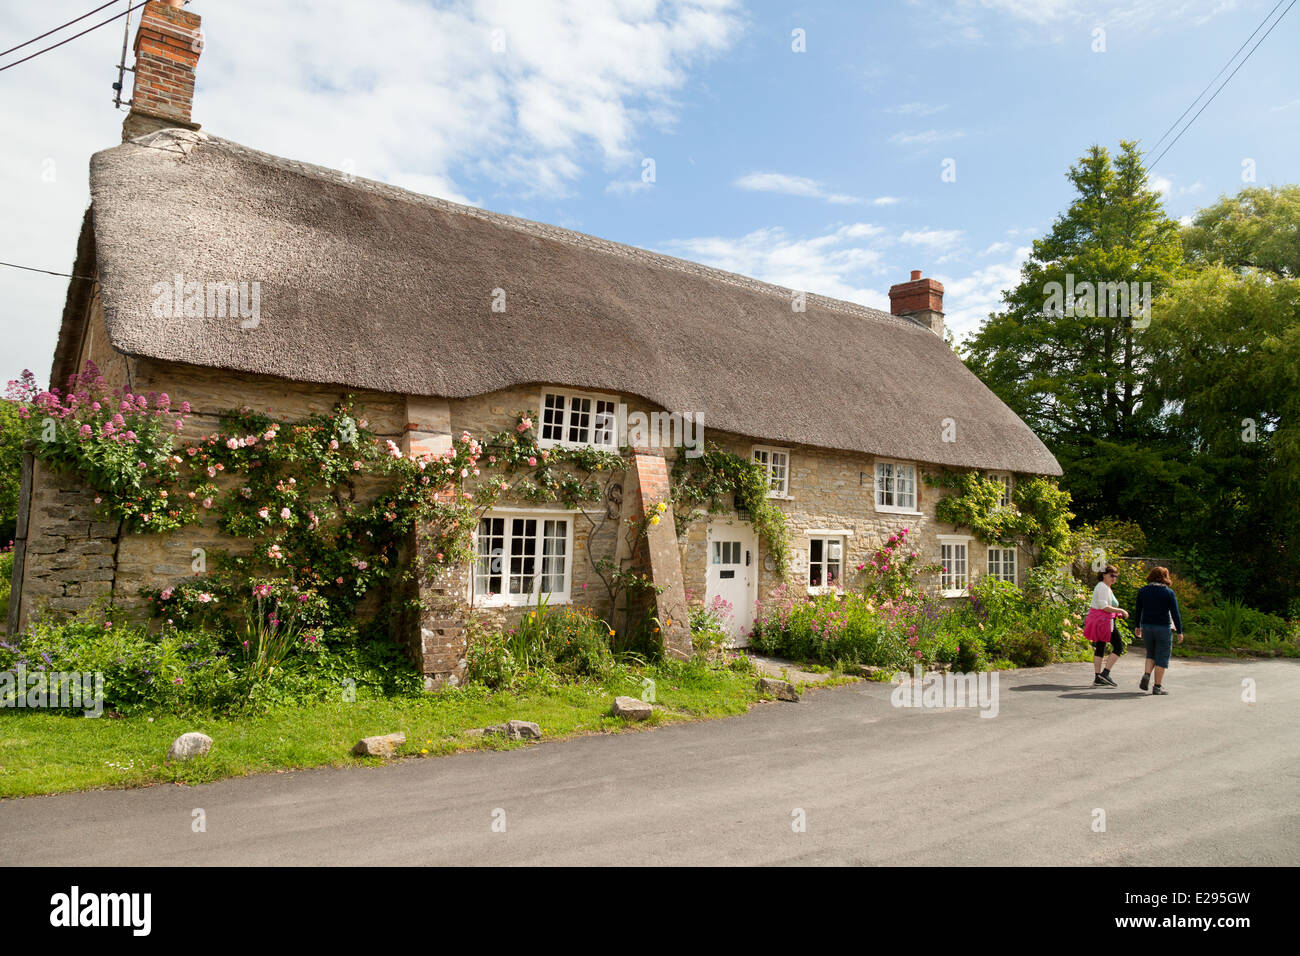 Traditional Thatched Cottage In Dorset Village Of Burton Bradstock